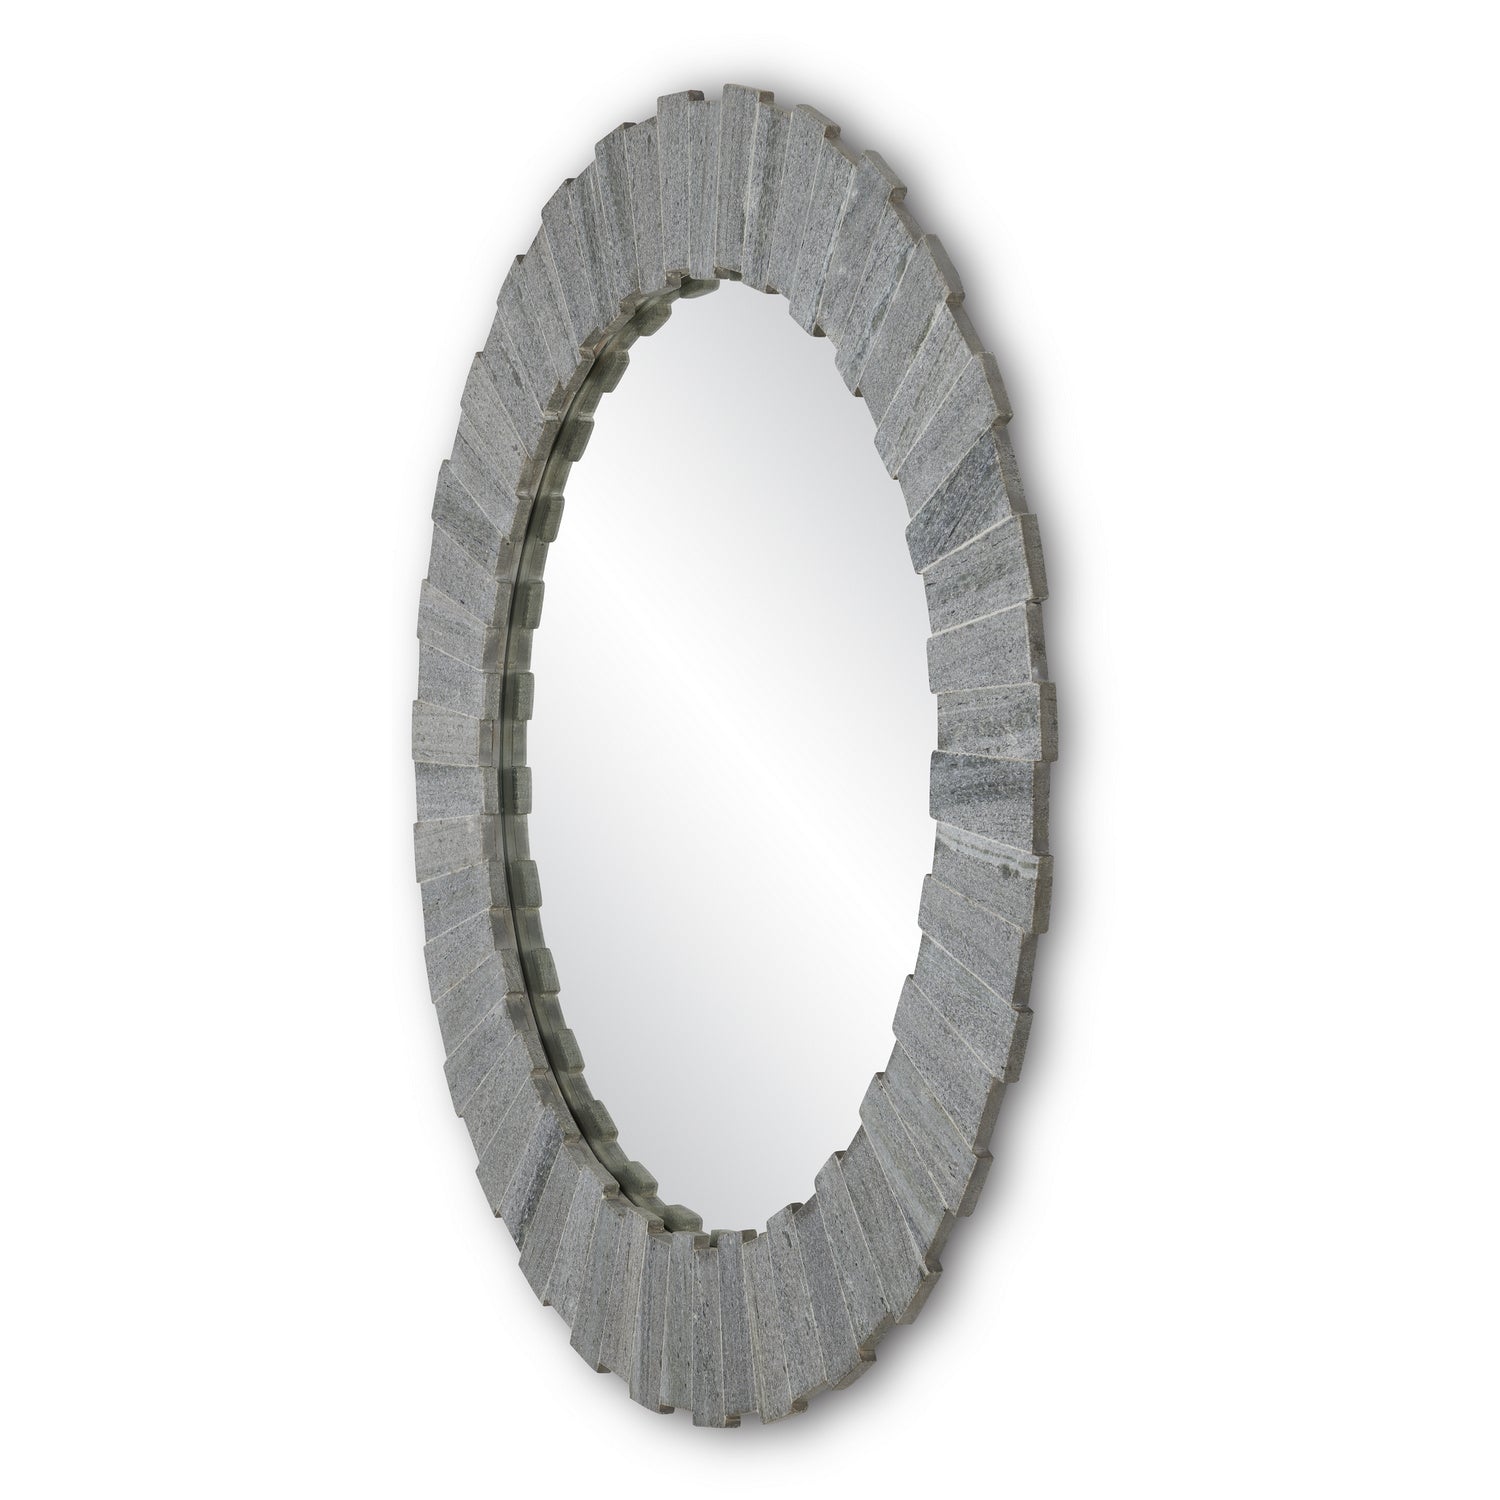 Mirror from the Dario collection in Gray/Mirror finish